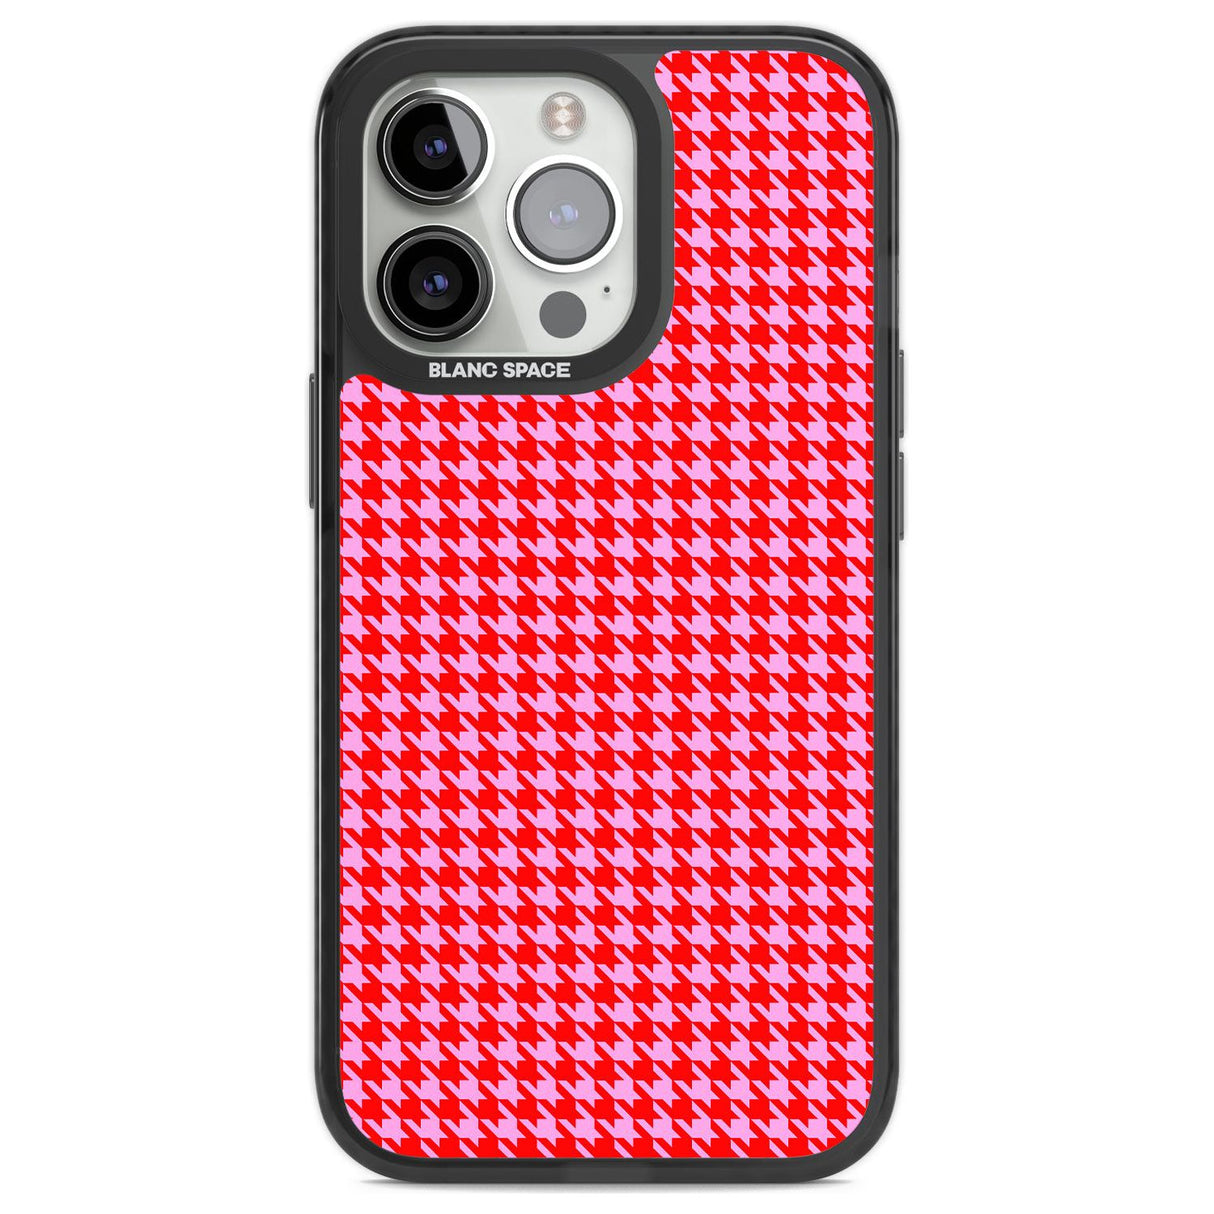 Neon Pink & Red Houndstooth Pattern Phone Case iPhone 13 Pro / Black Impact Case,iPhone 14 Pro / Black Impact Case,iPhone 15 Pro Max / Black Impact Case,iPhone 15 Pro / Black Impact Case Blanc Space